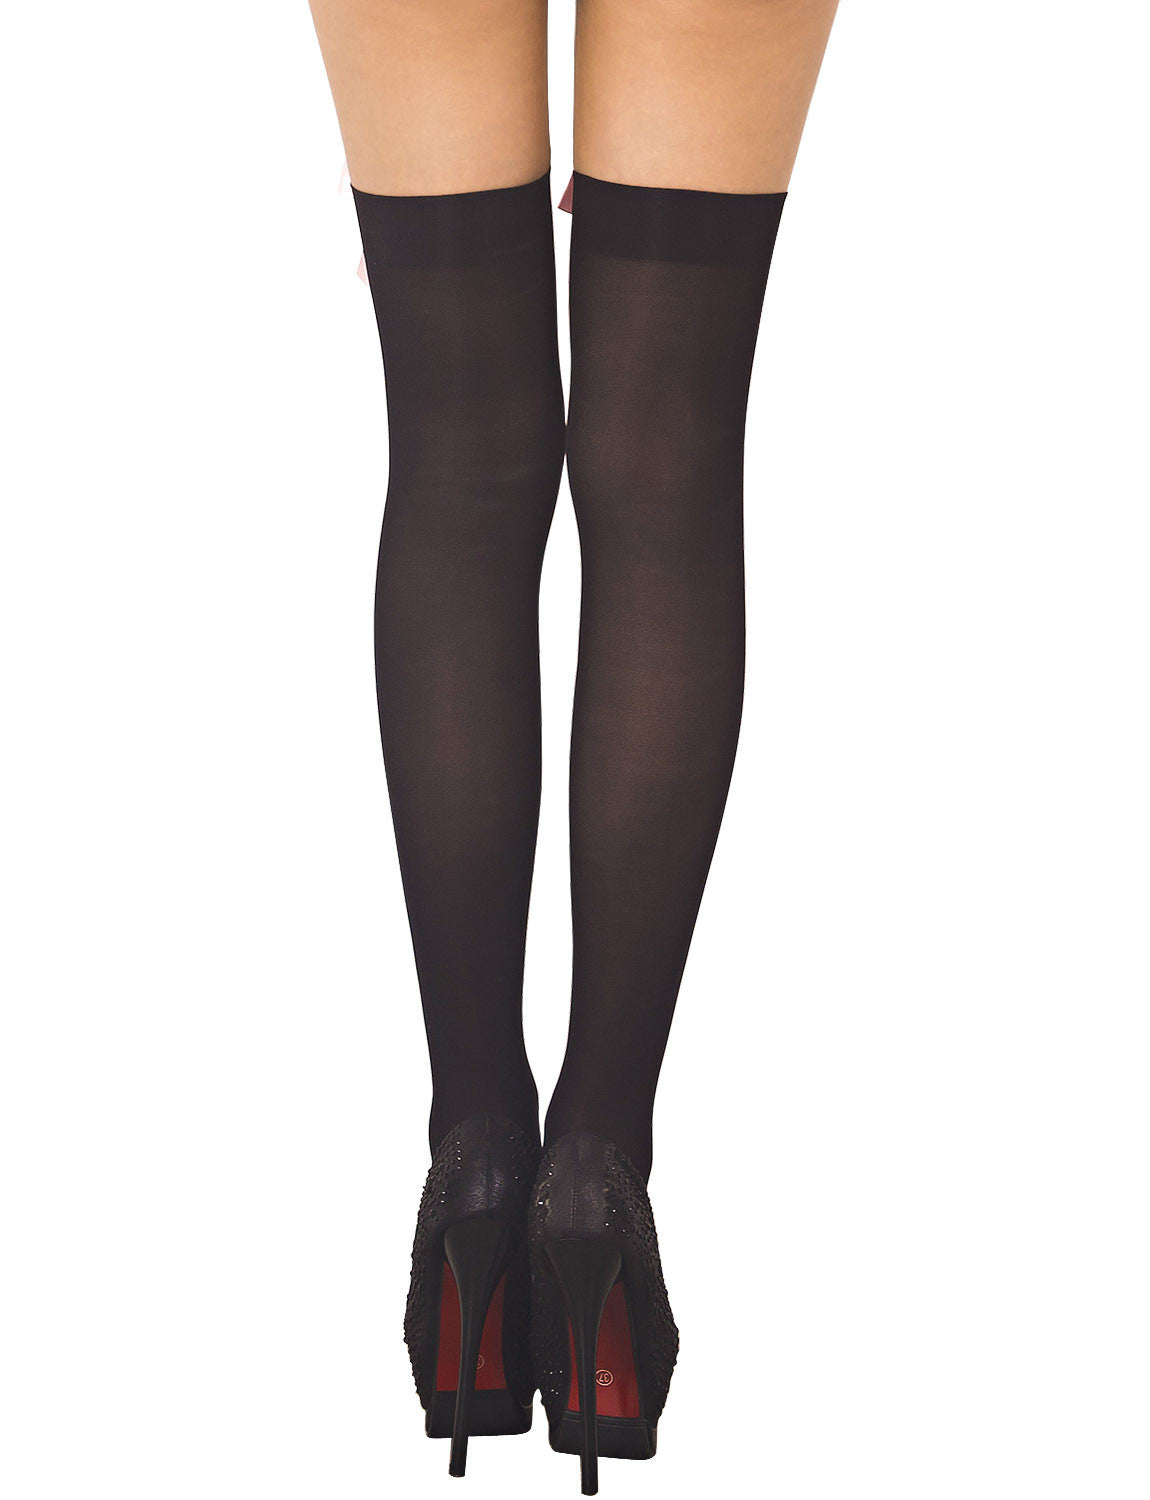 Women's Bones Tied Up Patterned Seamless Punk Thigh High Hold-up Stockings